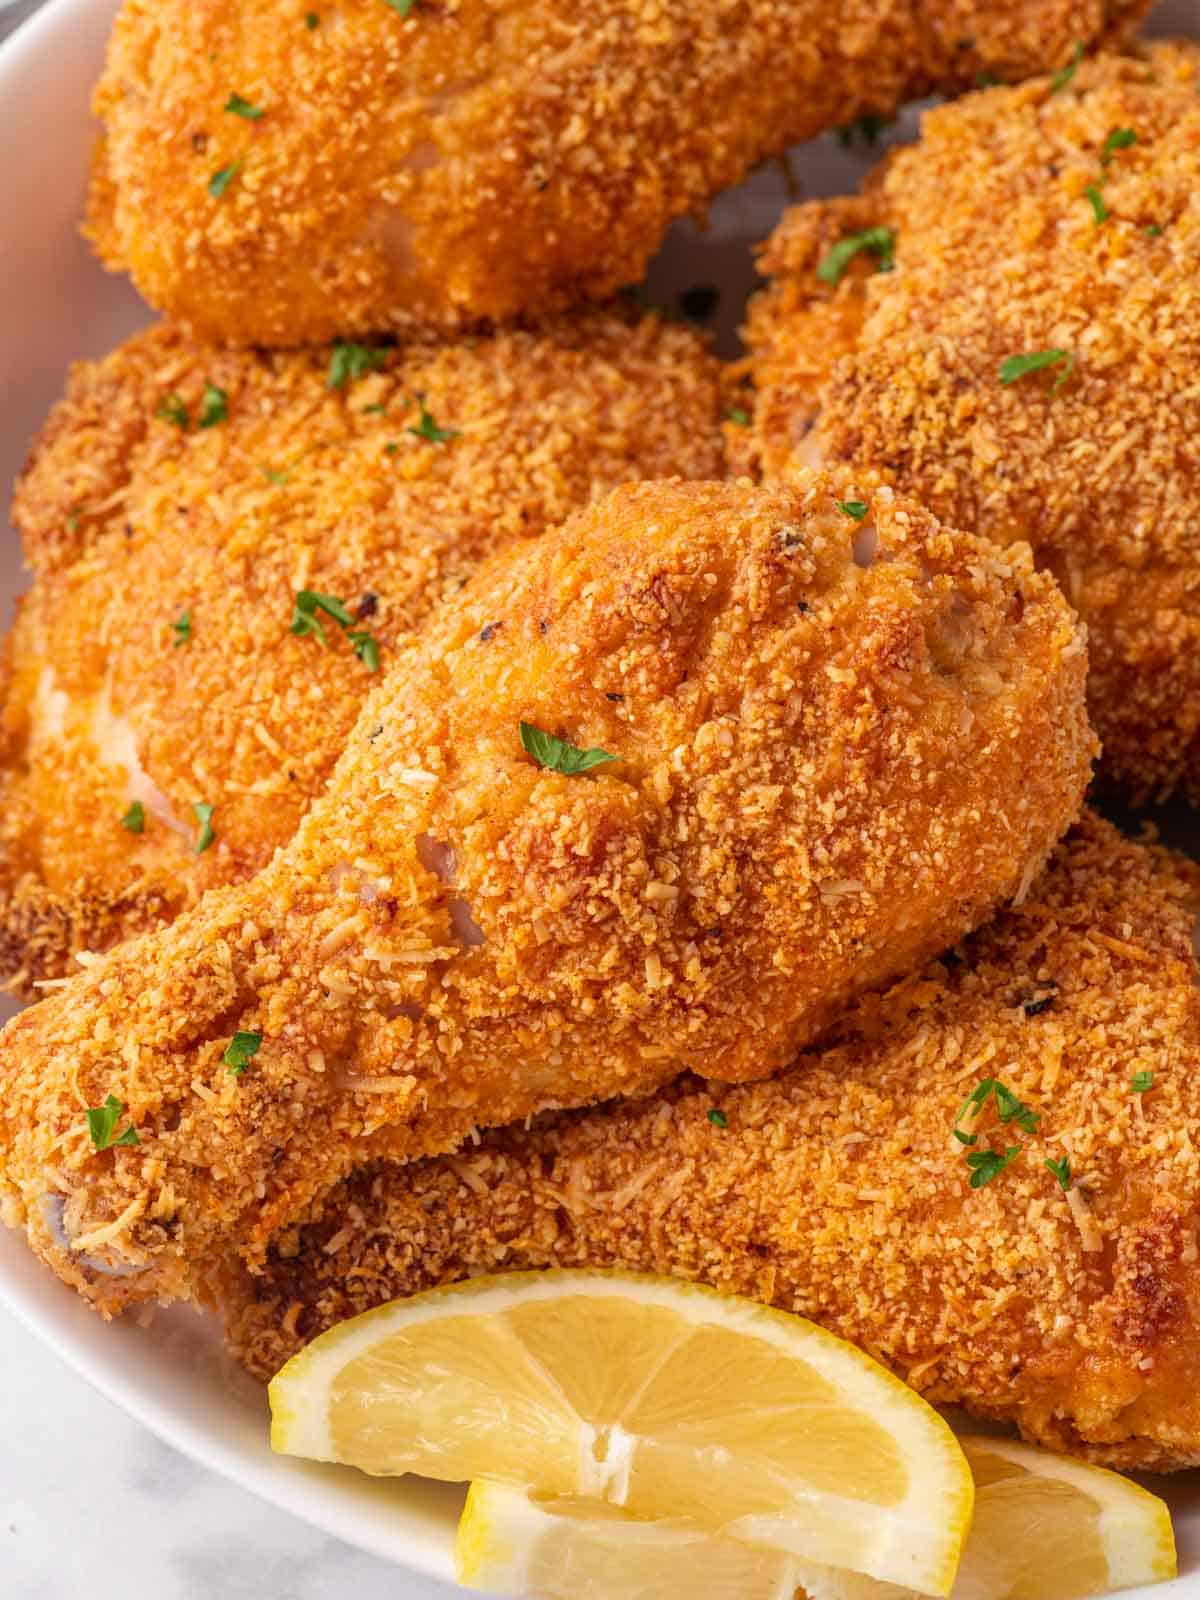 Closeup of fried chicken with almond flour coating.